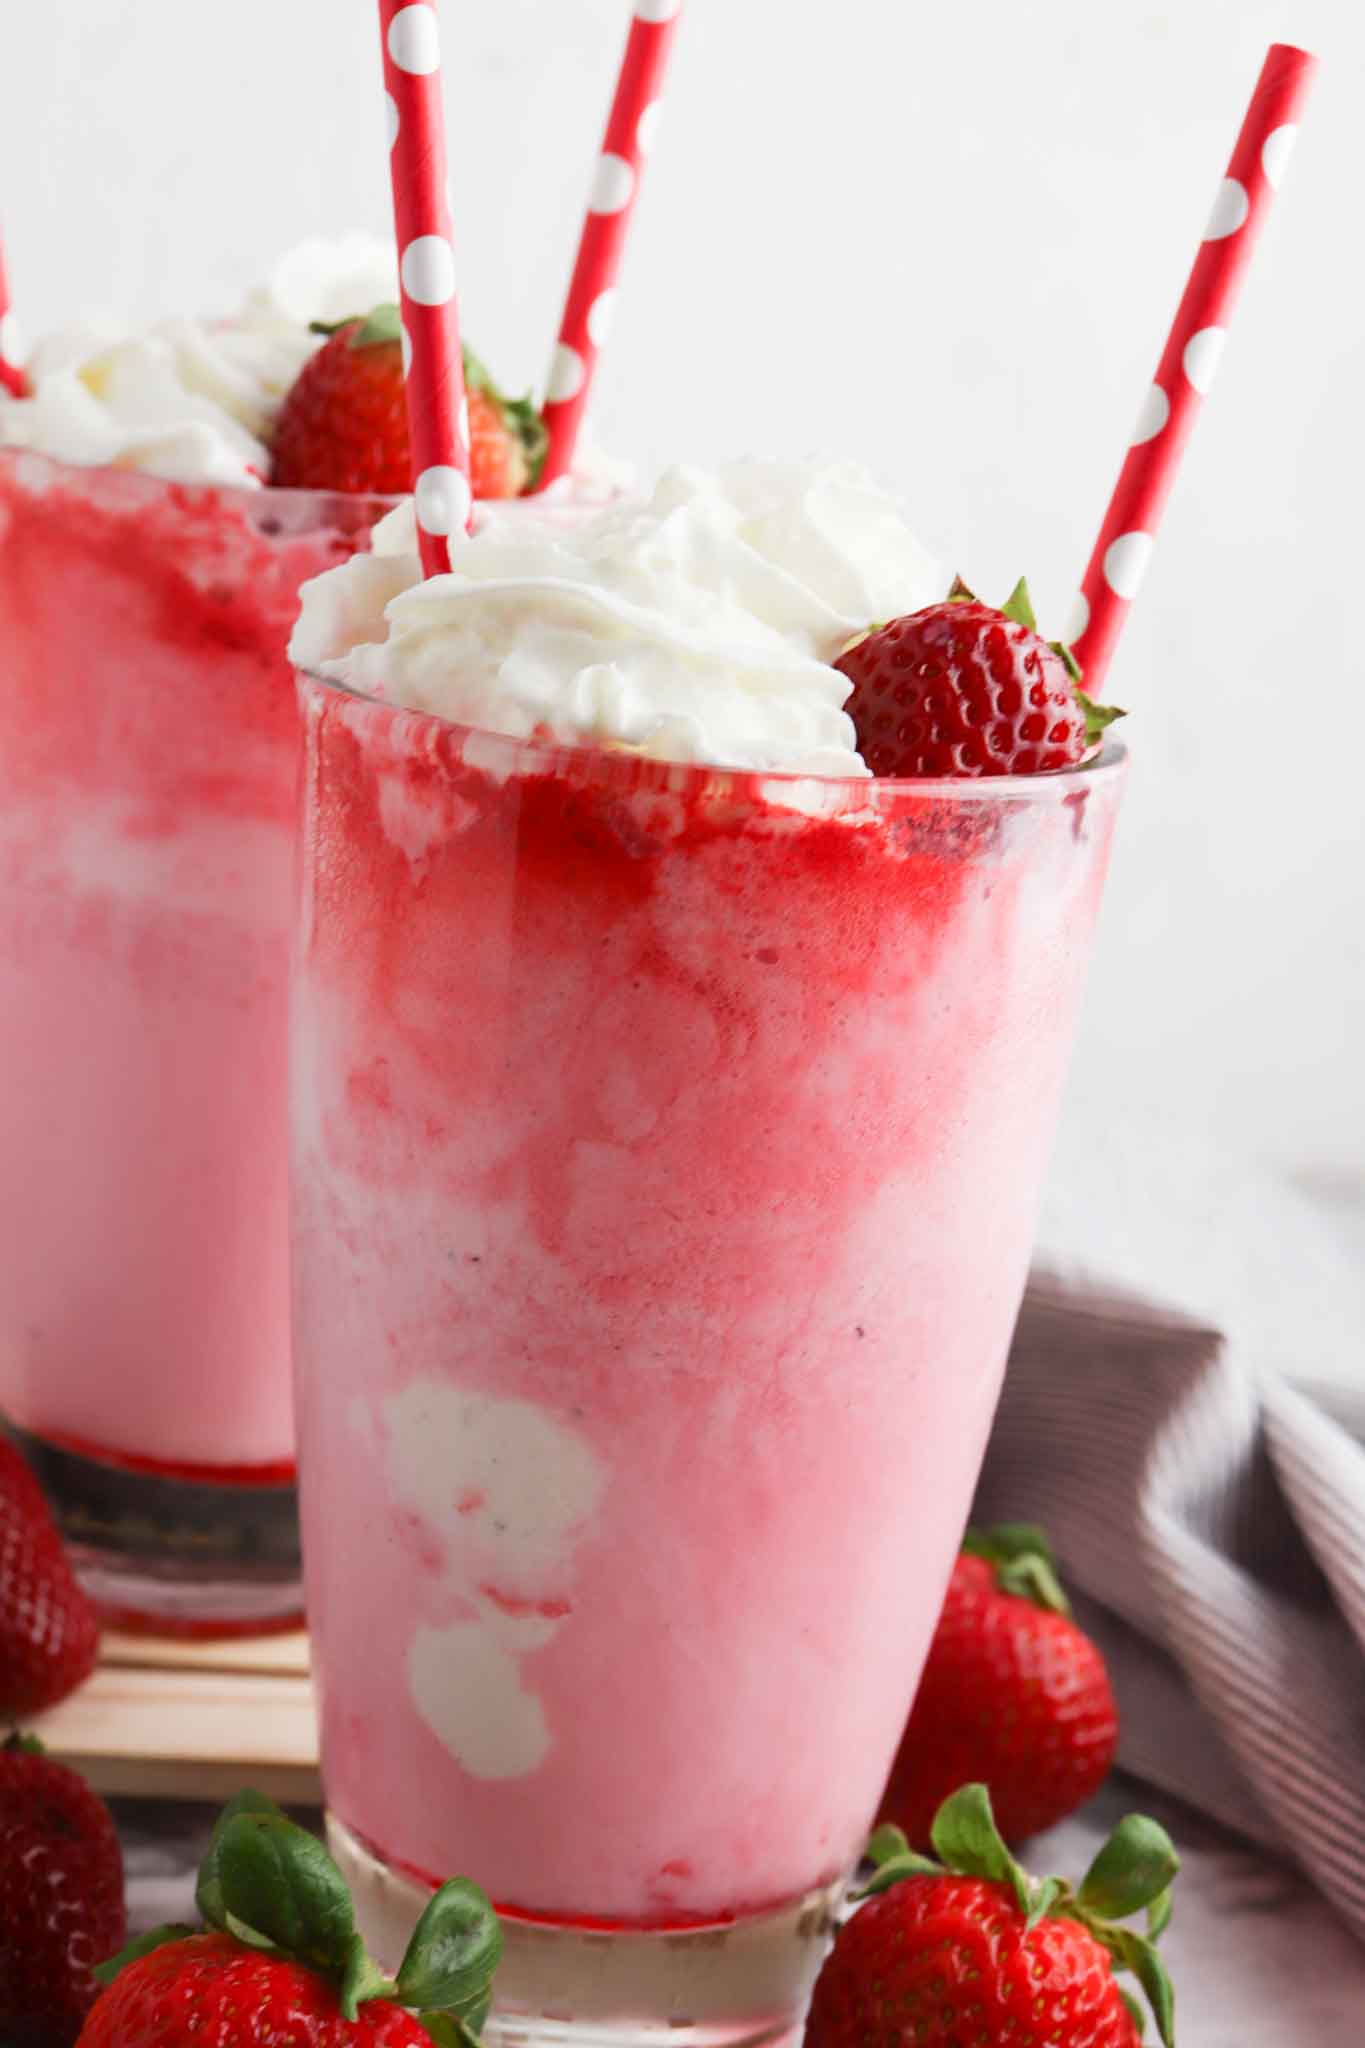 Easy Strawberry and Cream Floats